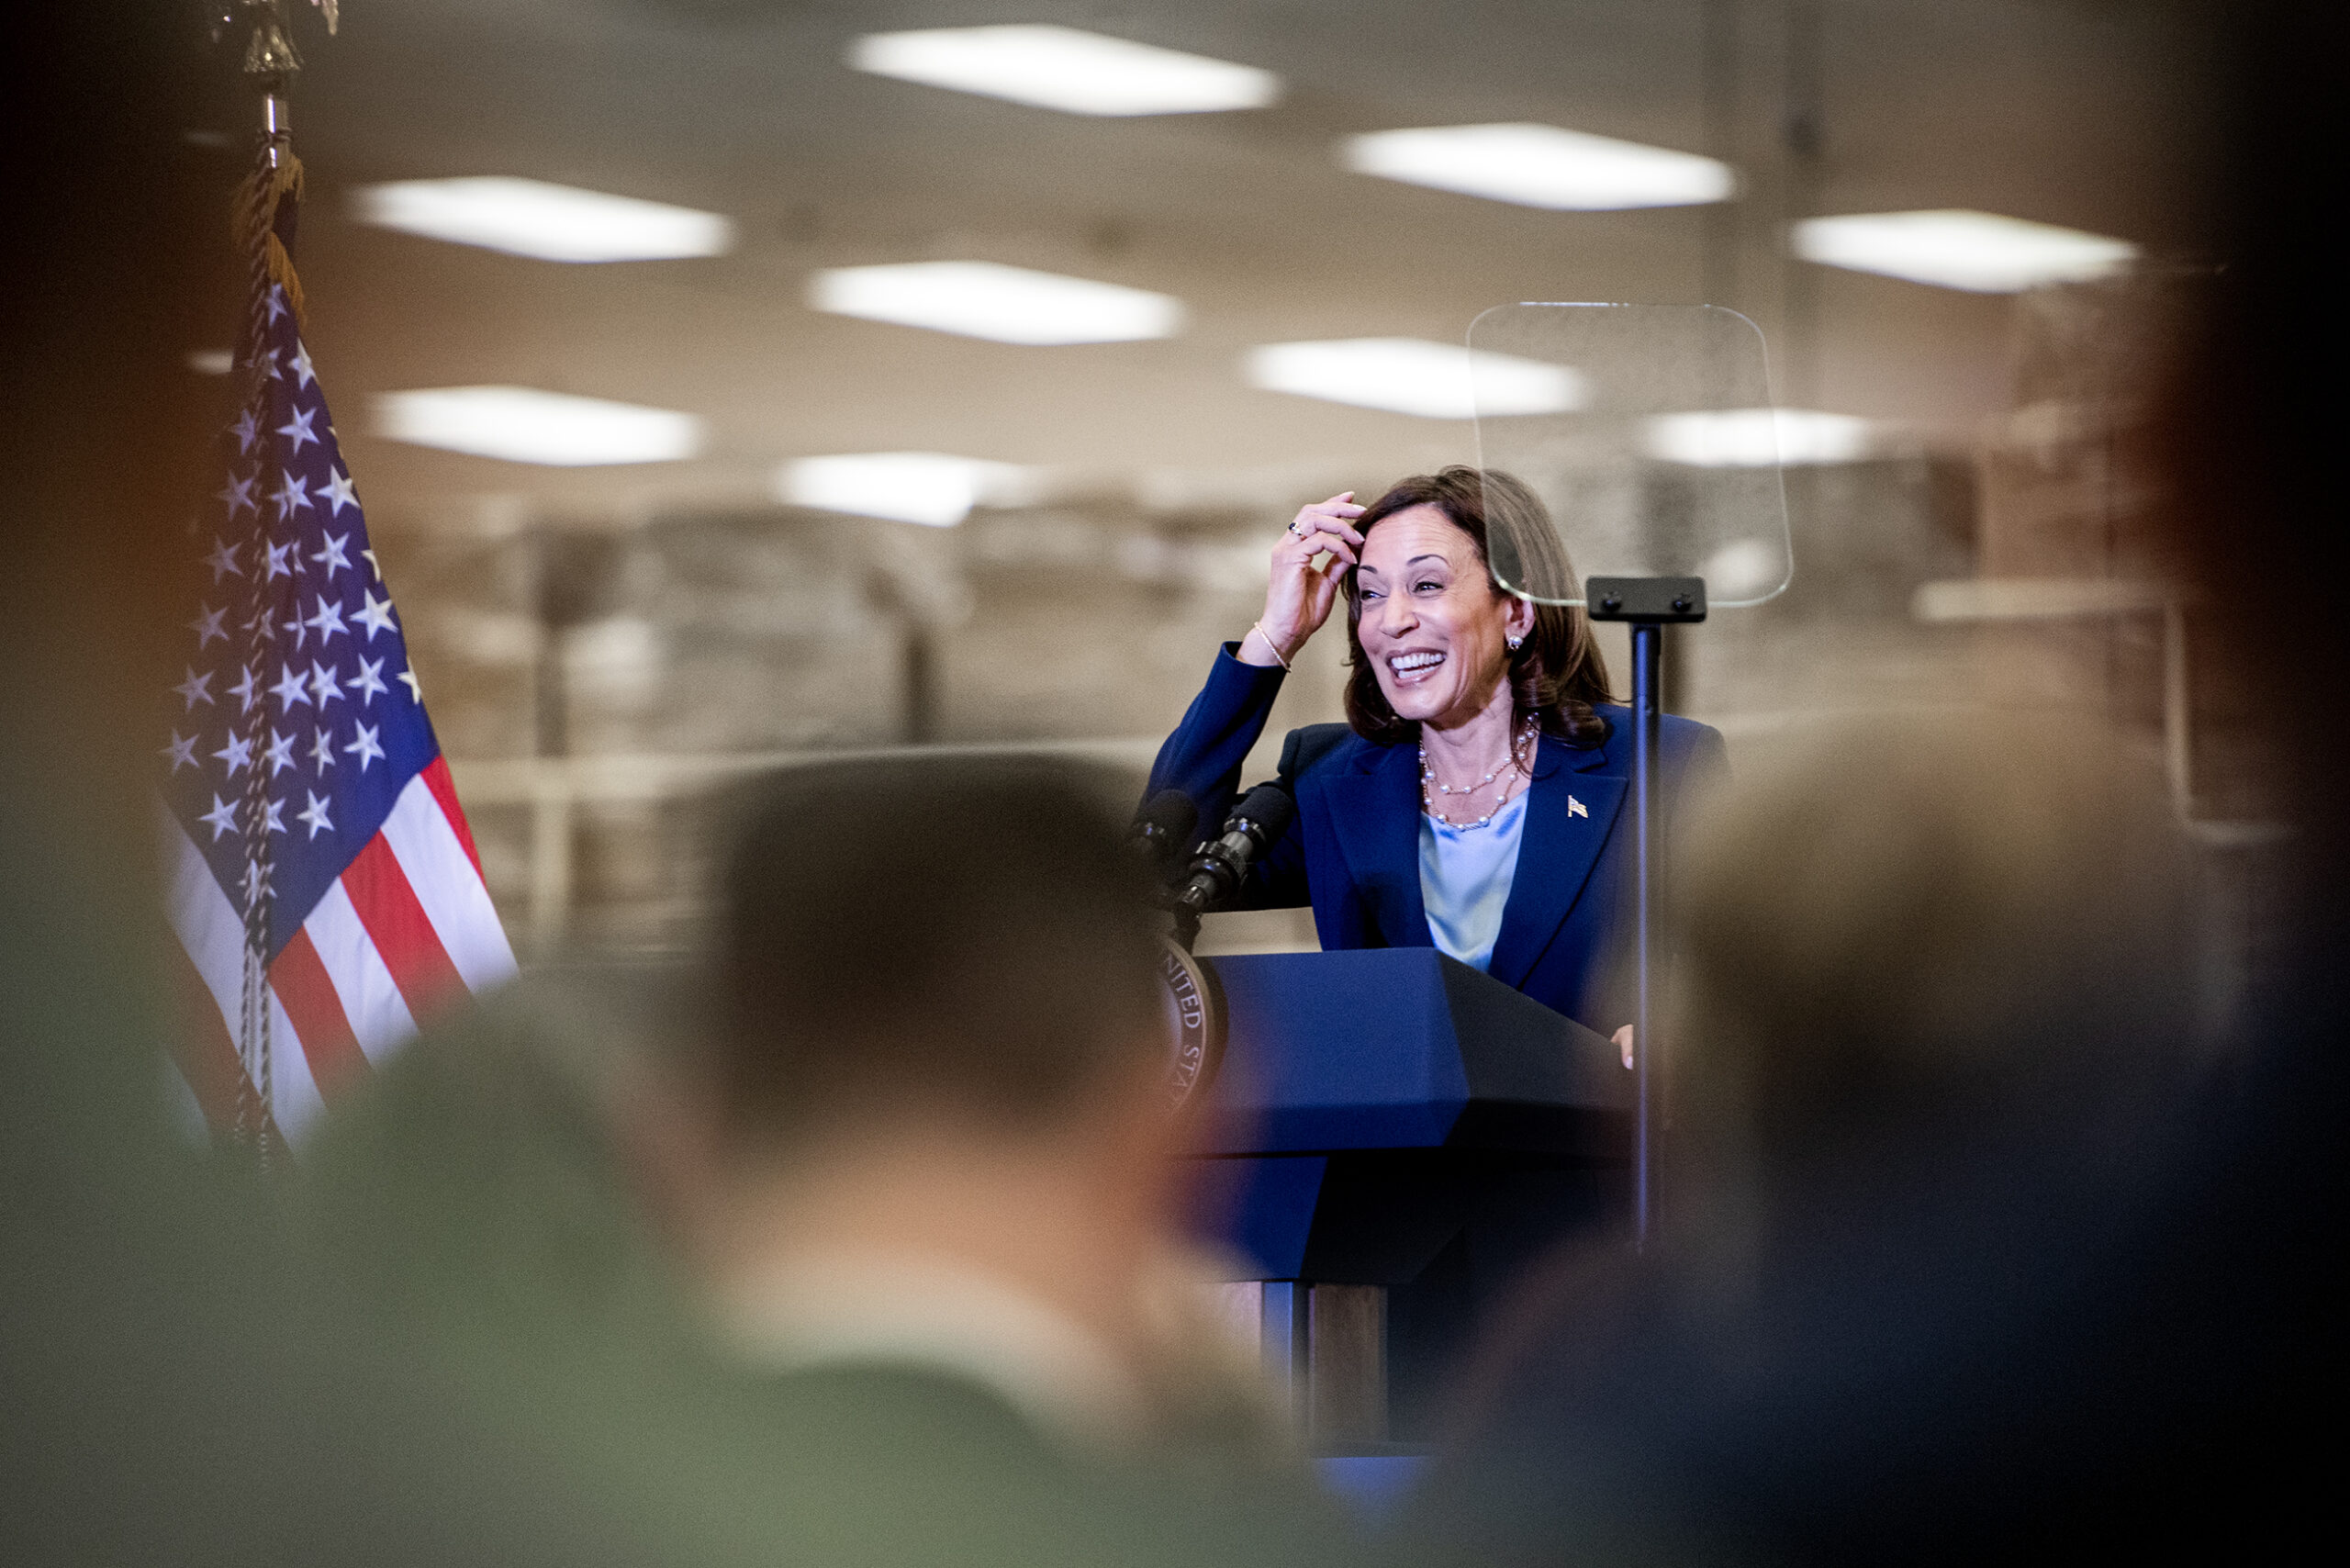 Harris will tout apprenticeships in a swing state visit to Wisconsin